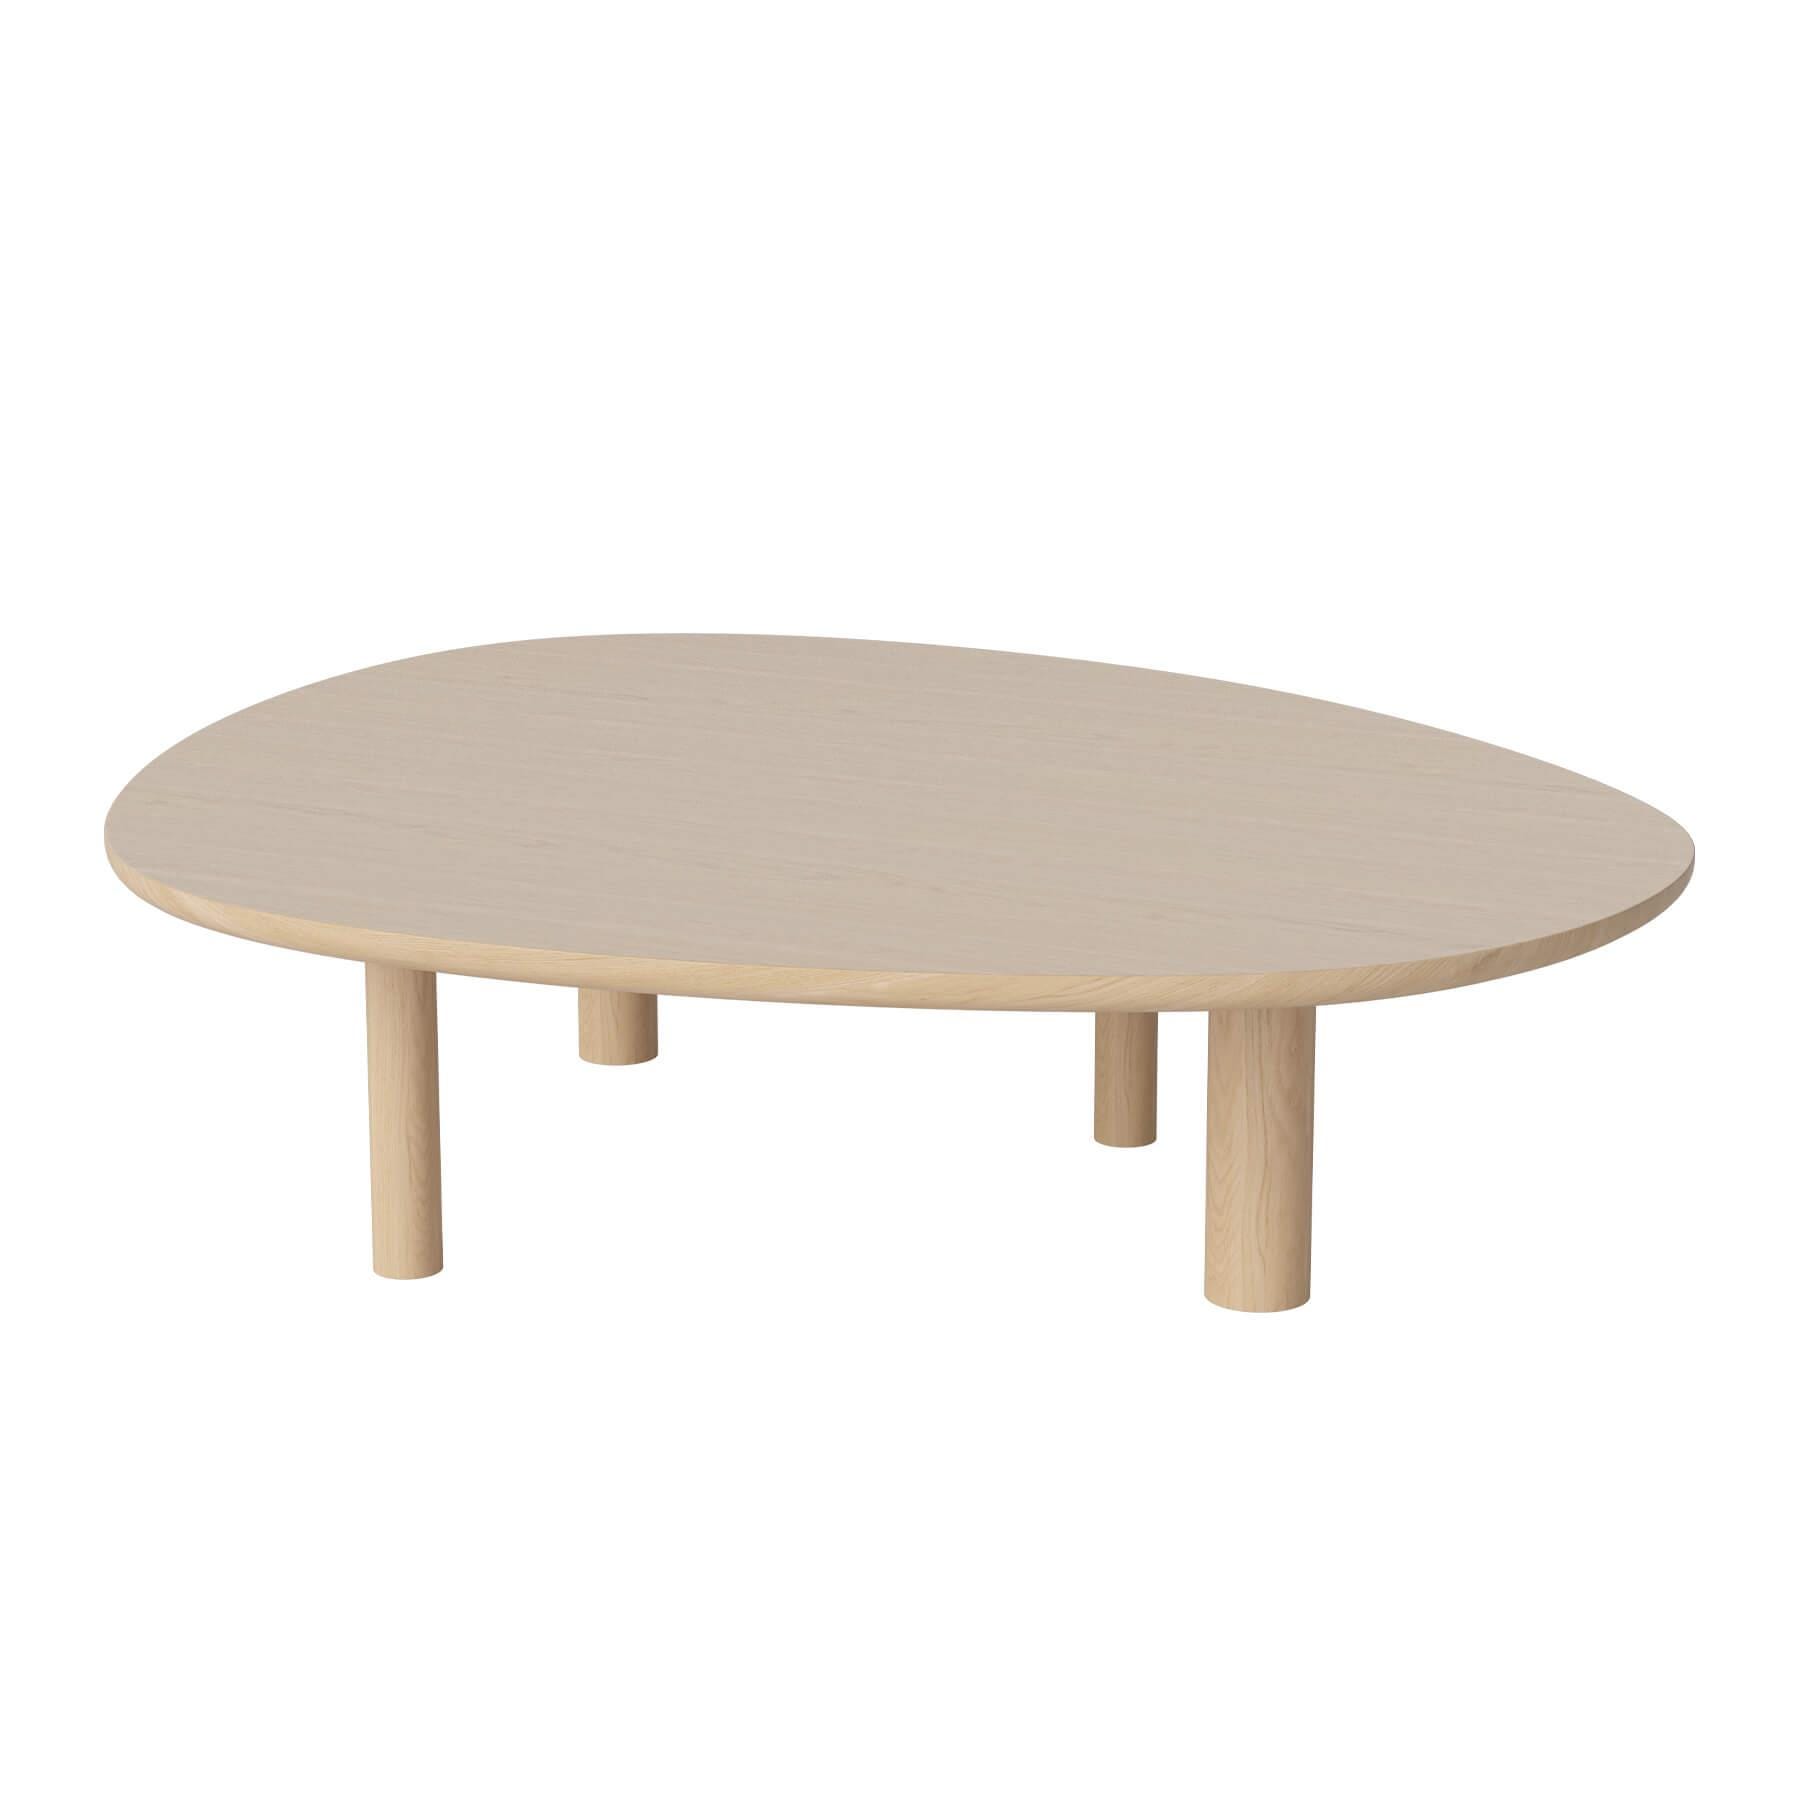 Bolia Latch Coffee Table Large White Oiled Oak Light Wood Designer Furniture From Holloways Of Ludlow